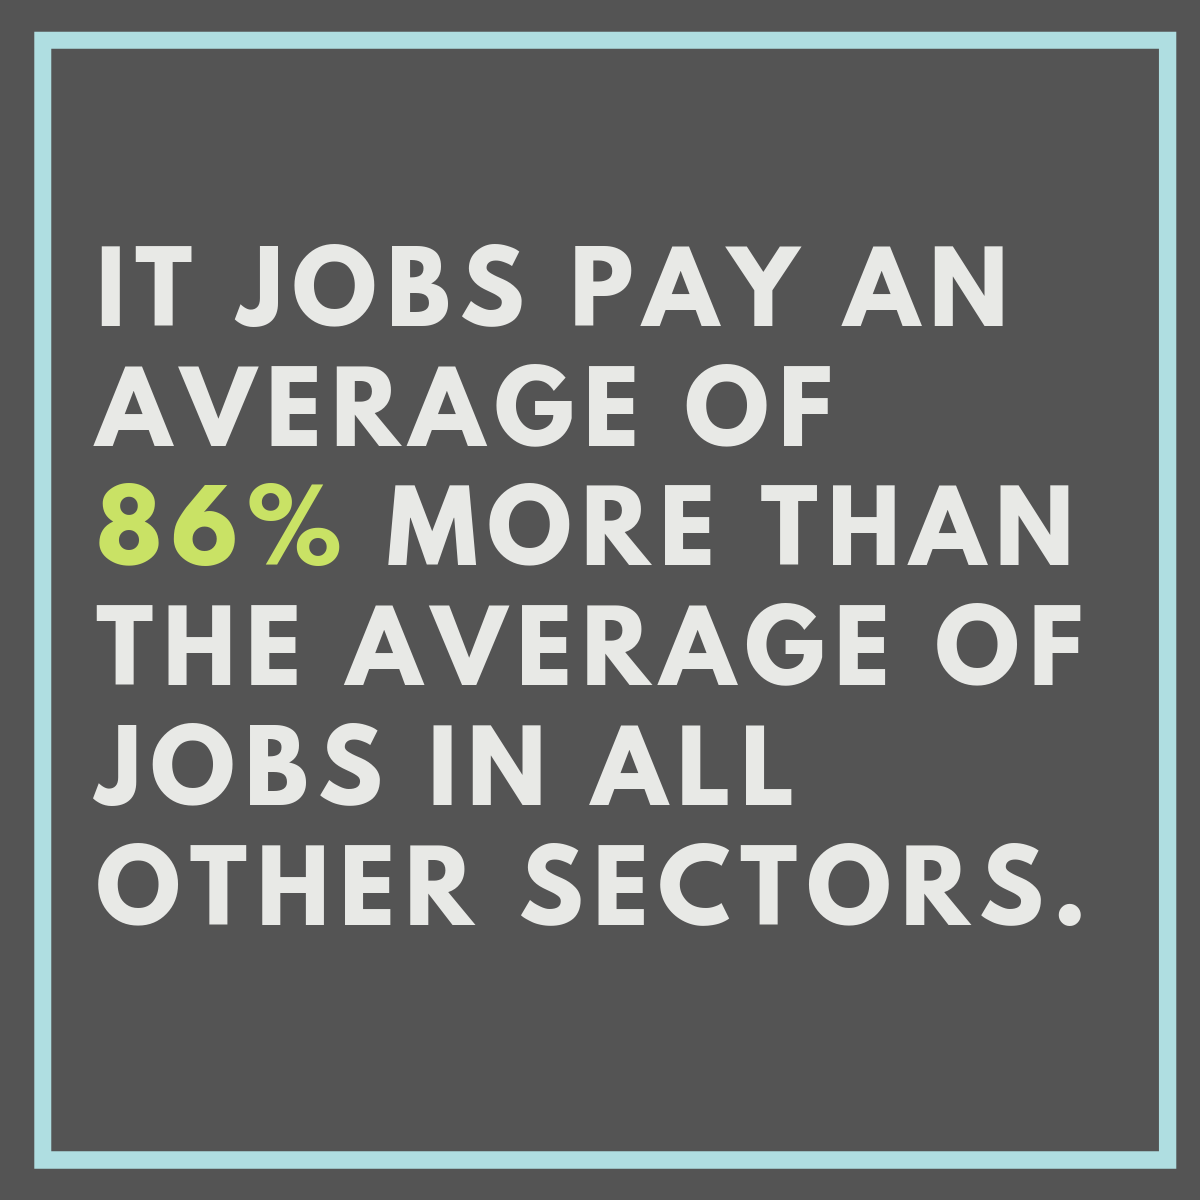 IT jobs pay an average of 86% more than the average of jobs in all other sectors.